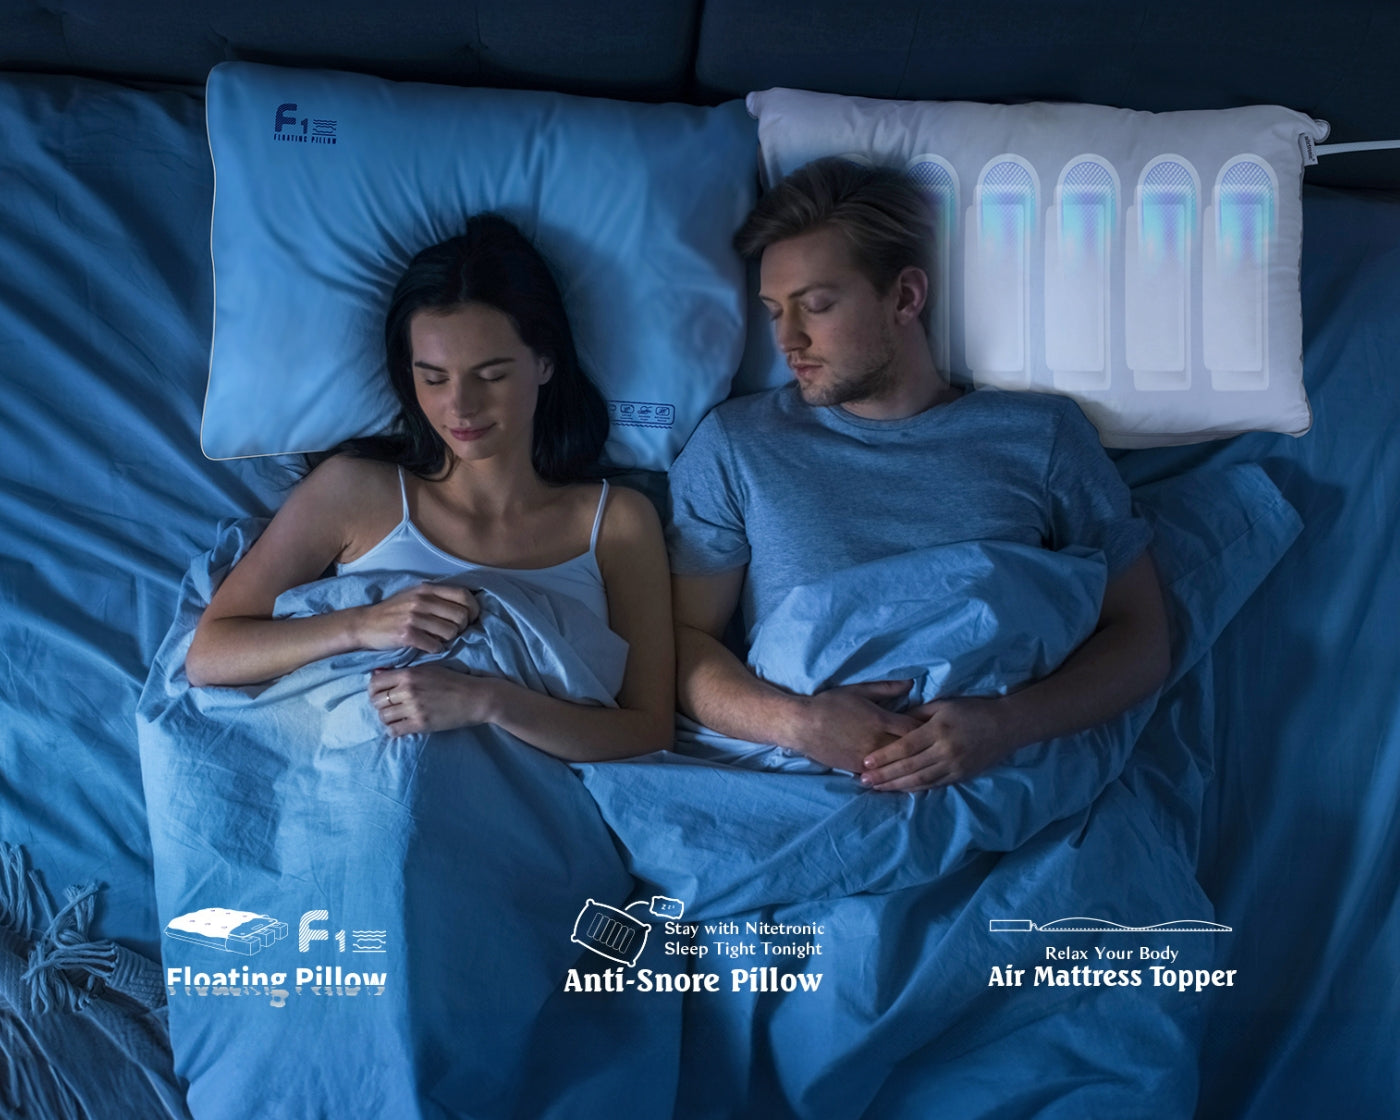 Nitetronic F1 Floating Pillow - The Ultimate Cooling Sleep Solution